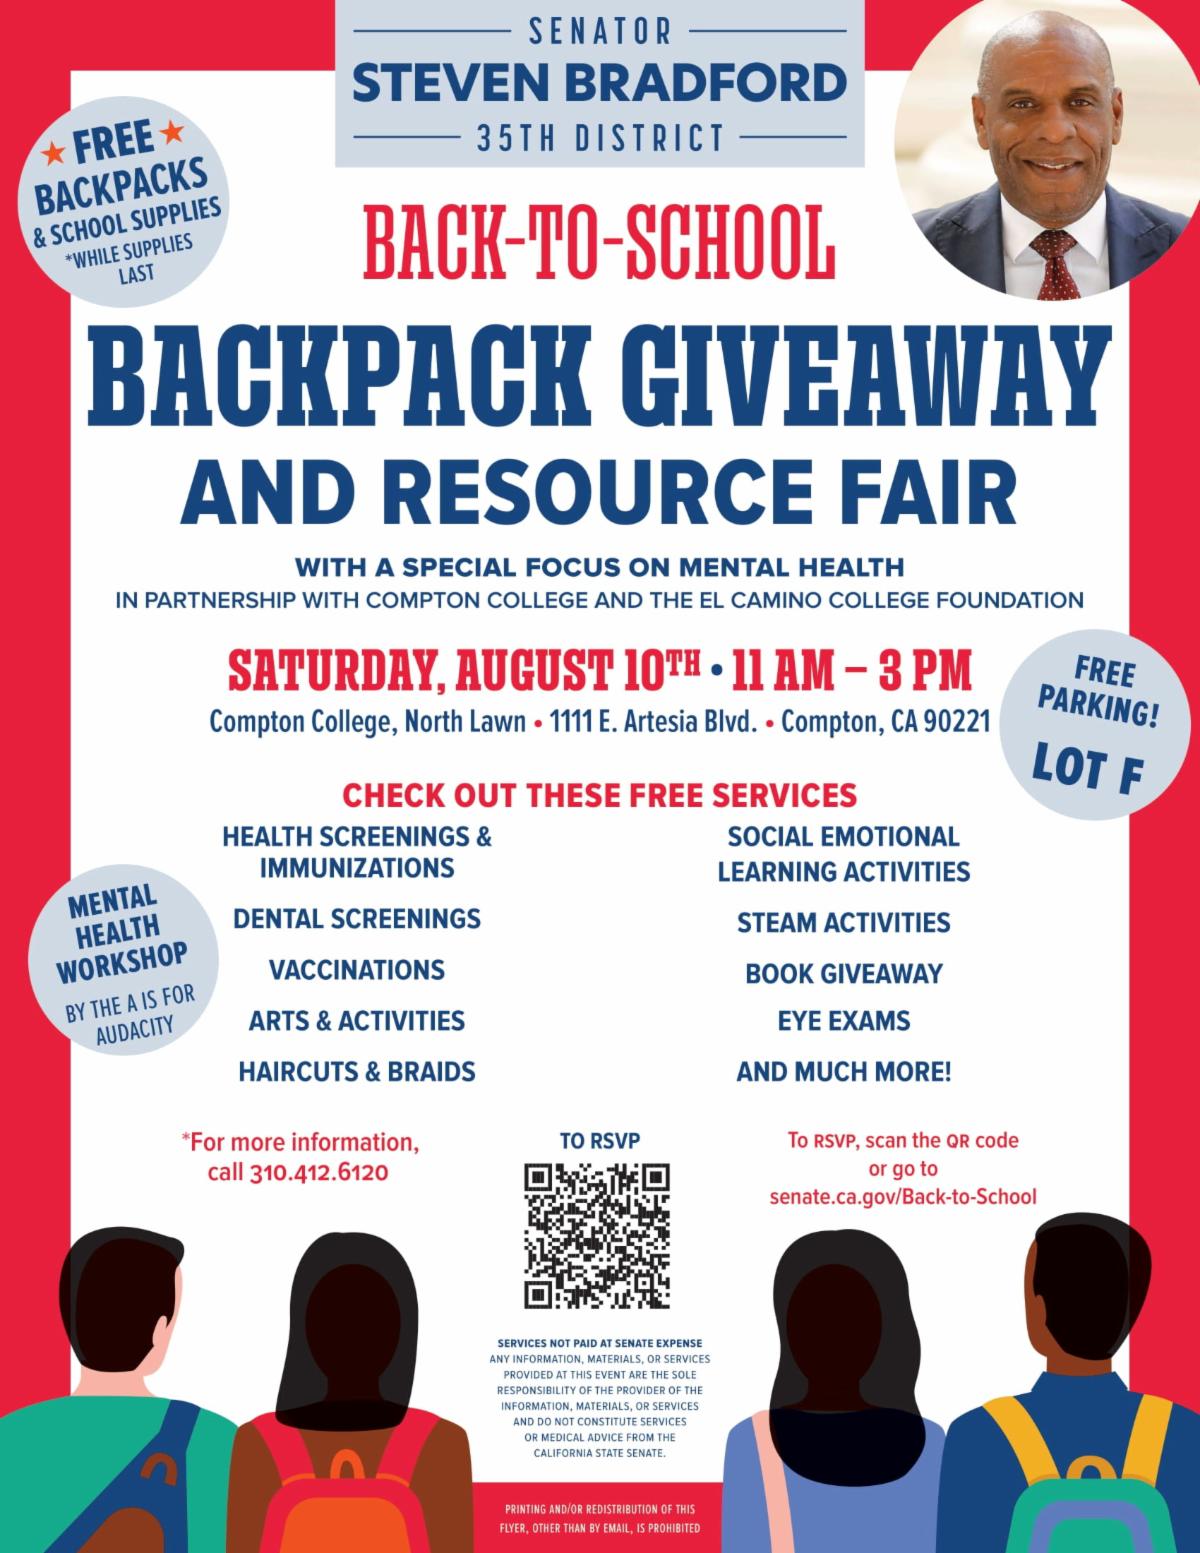 Back to school event